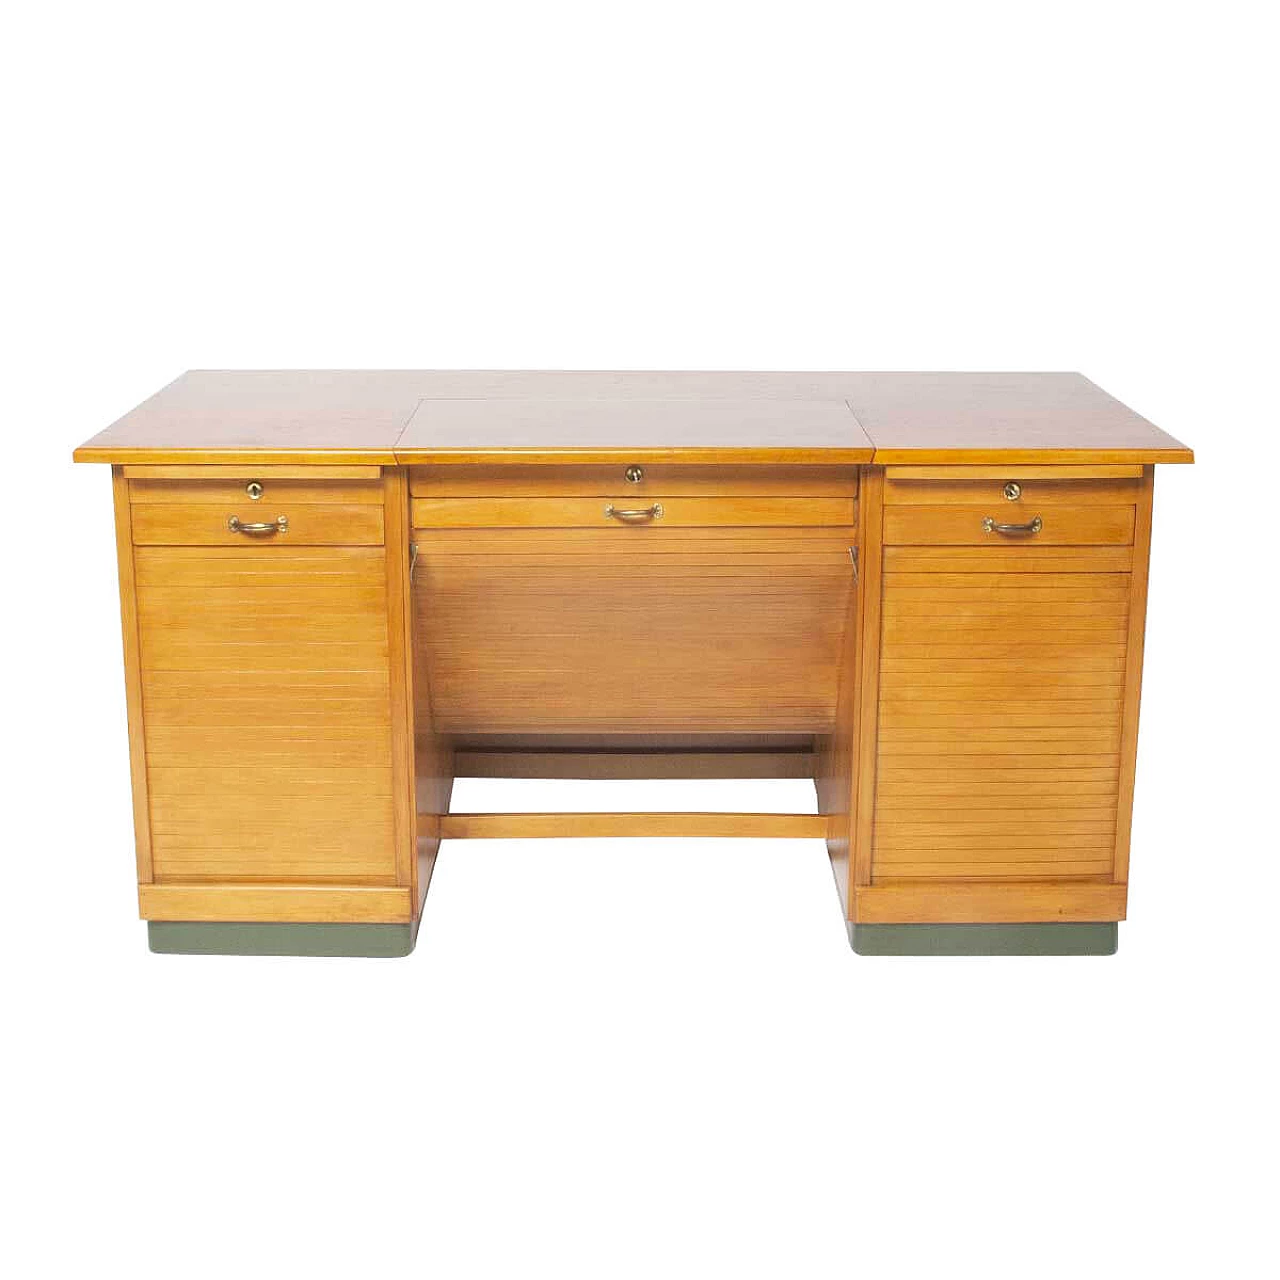 Desk in oak and beech with removable glass top by Soennecken, 1940s 1329457